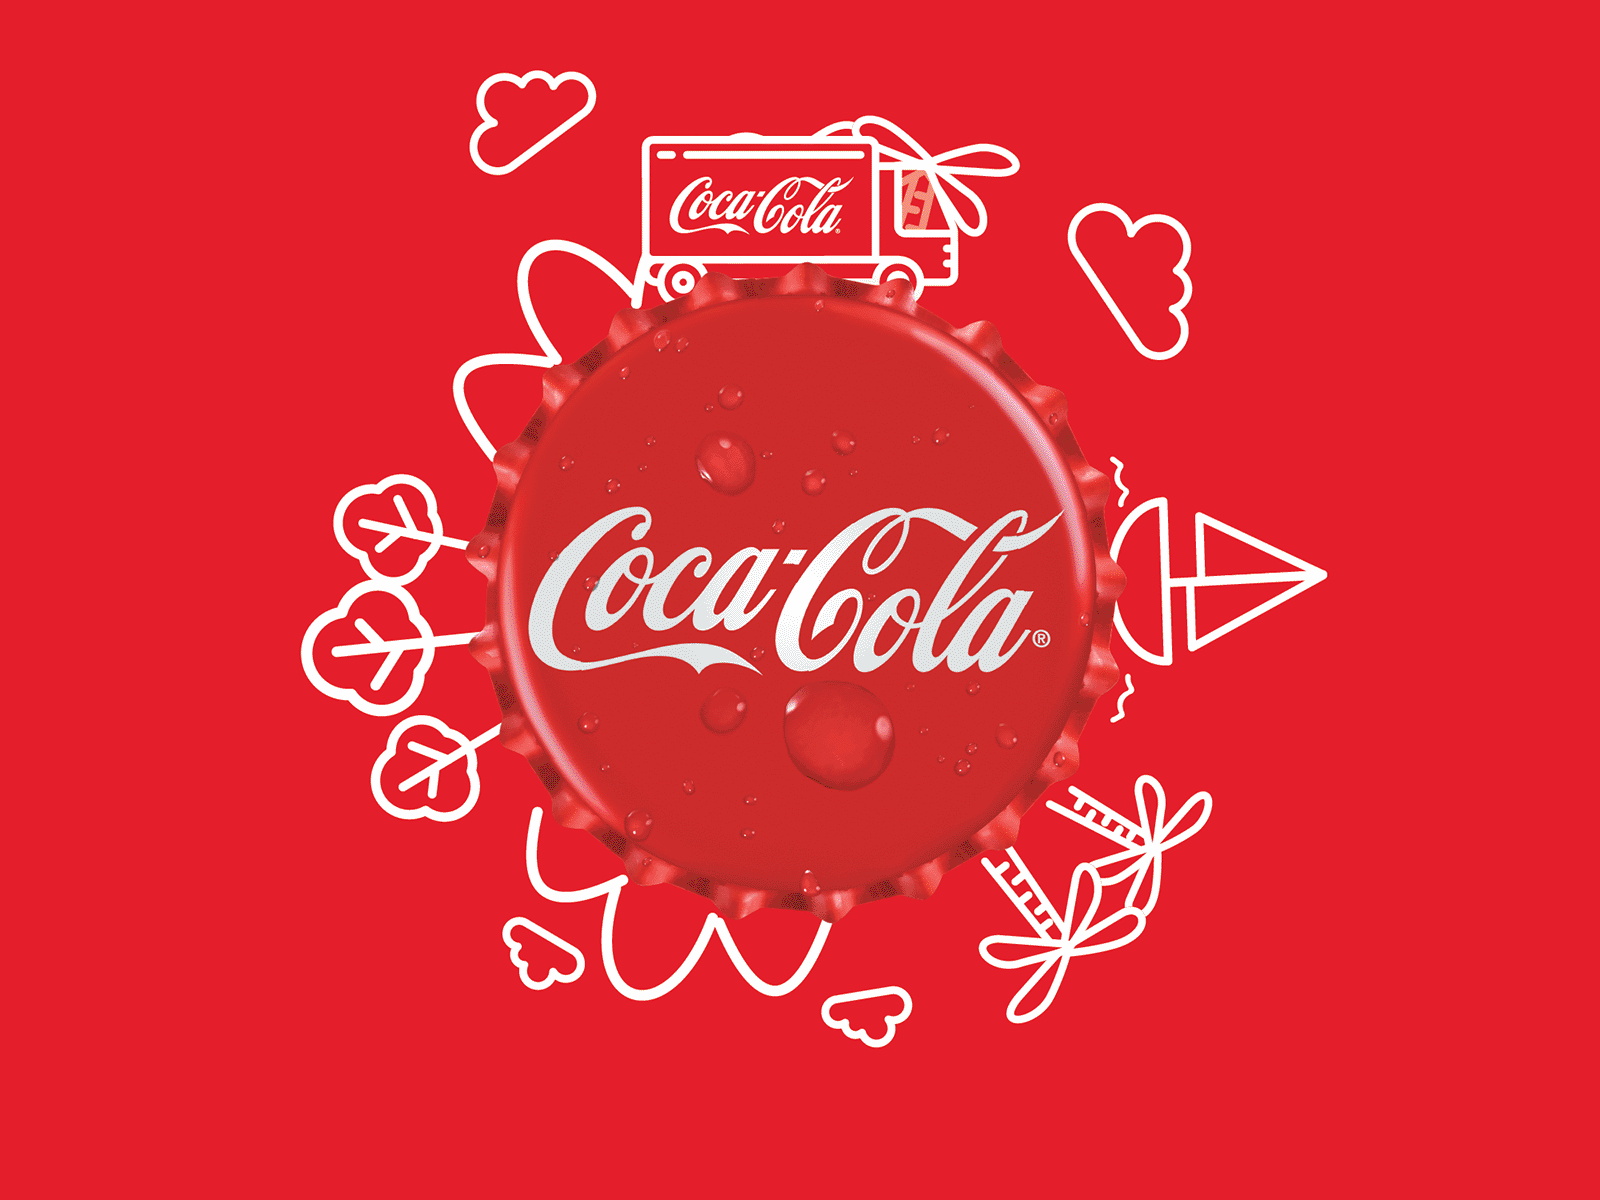 coca-cola-truck-by-c-sar-pe-a-on-dribbble